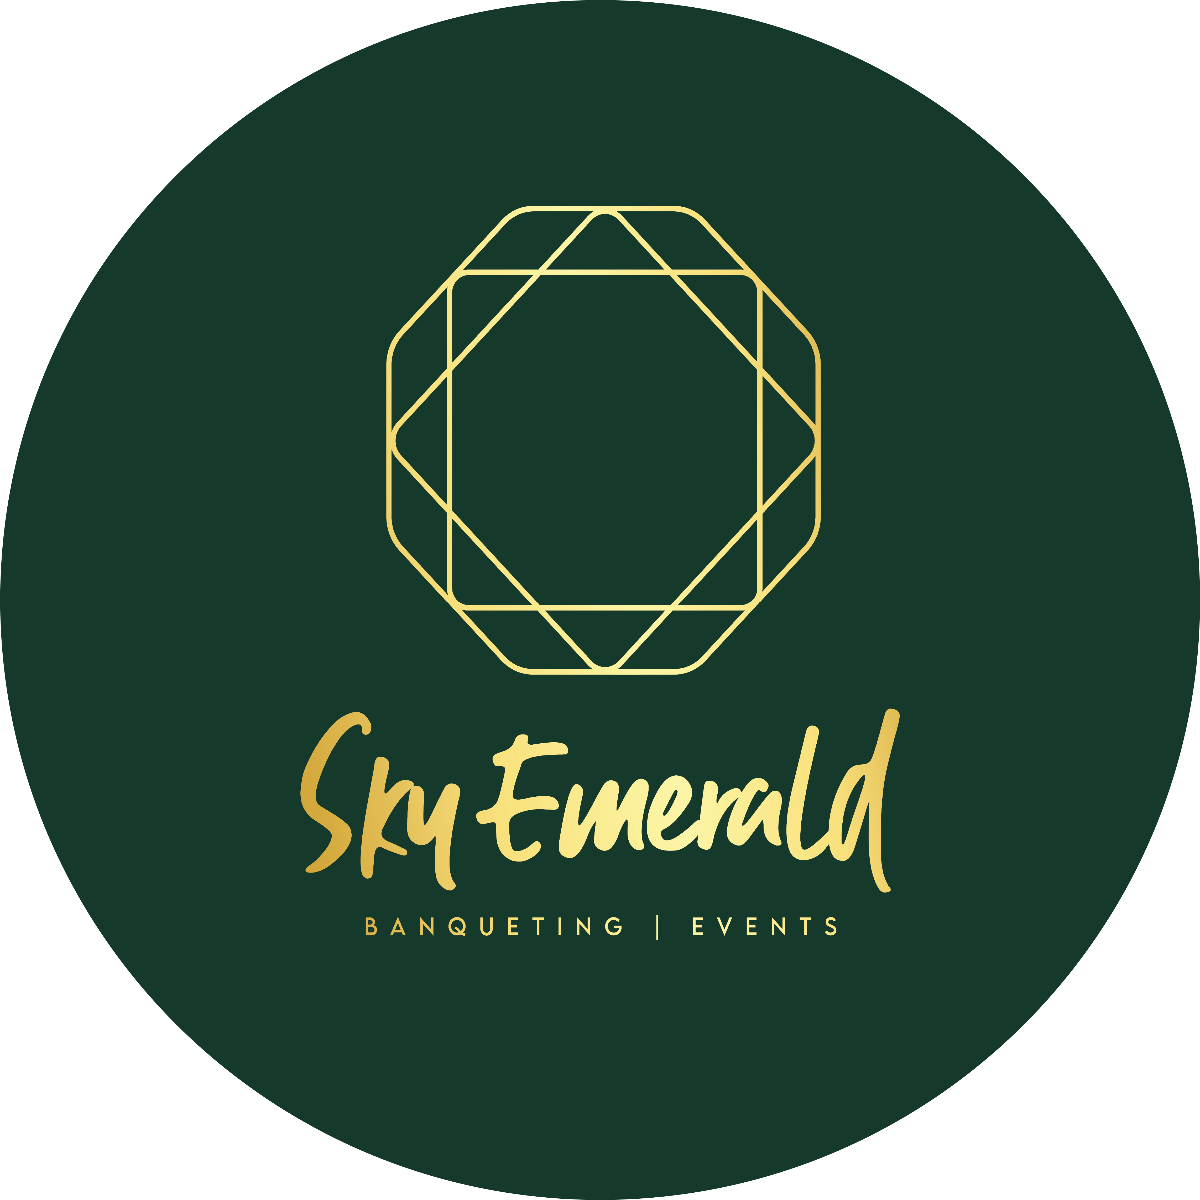 Gallery Item 7 for Sky Emerald Banqueting Suite